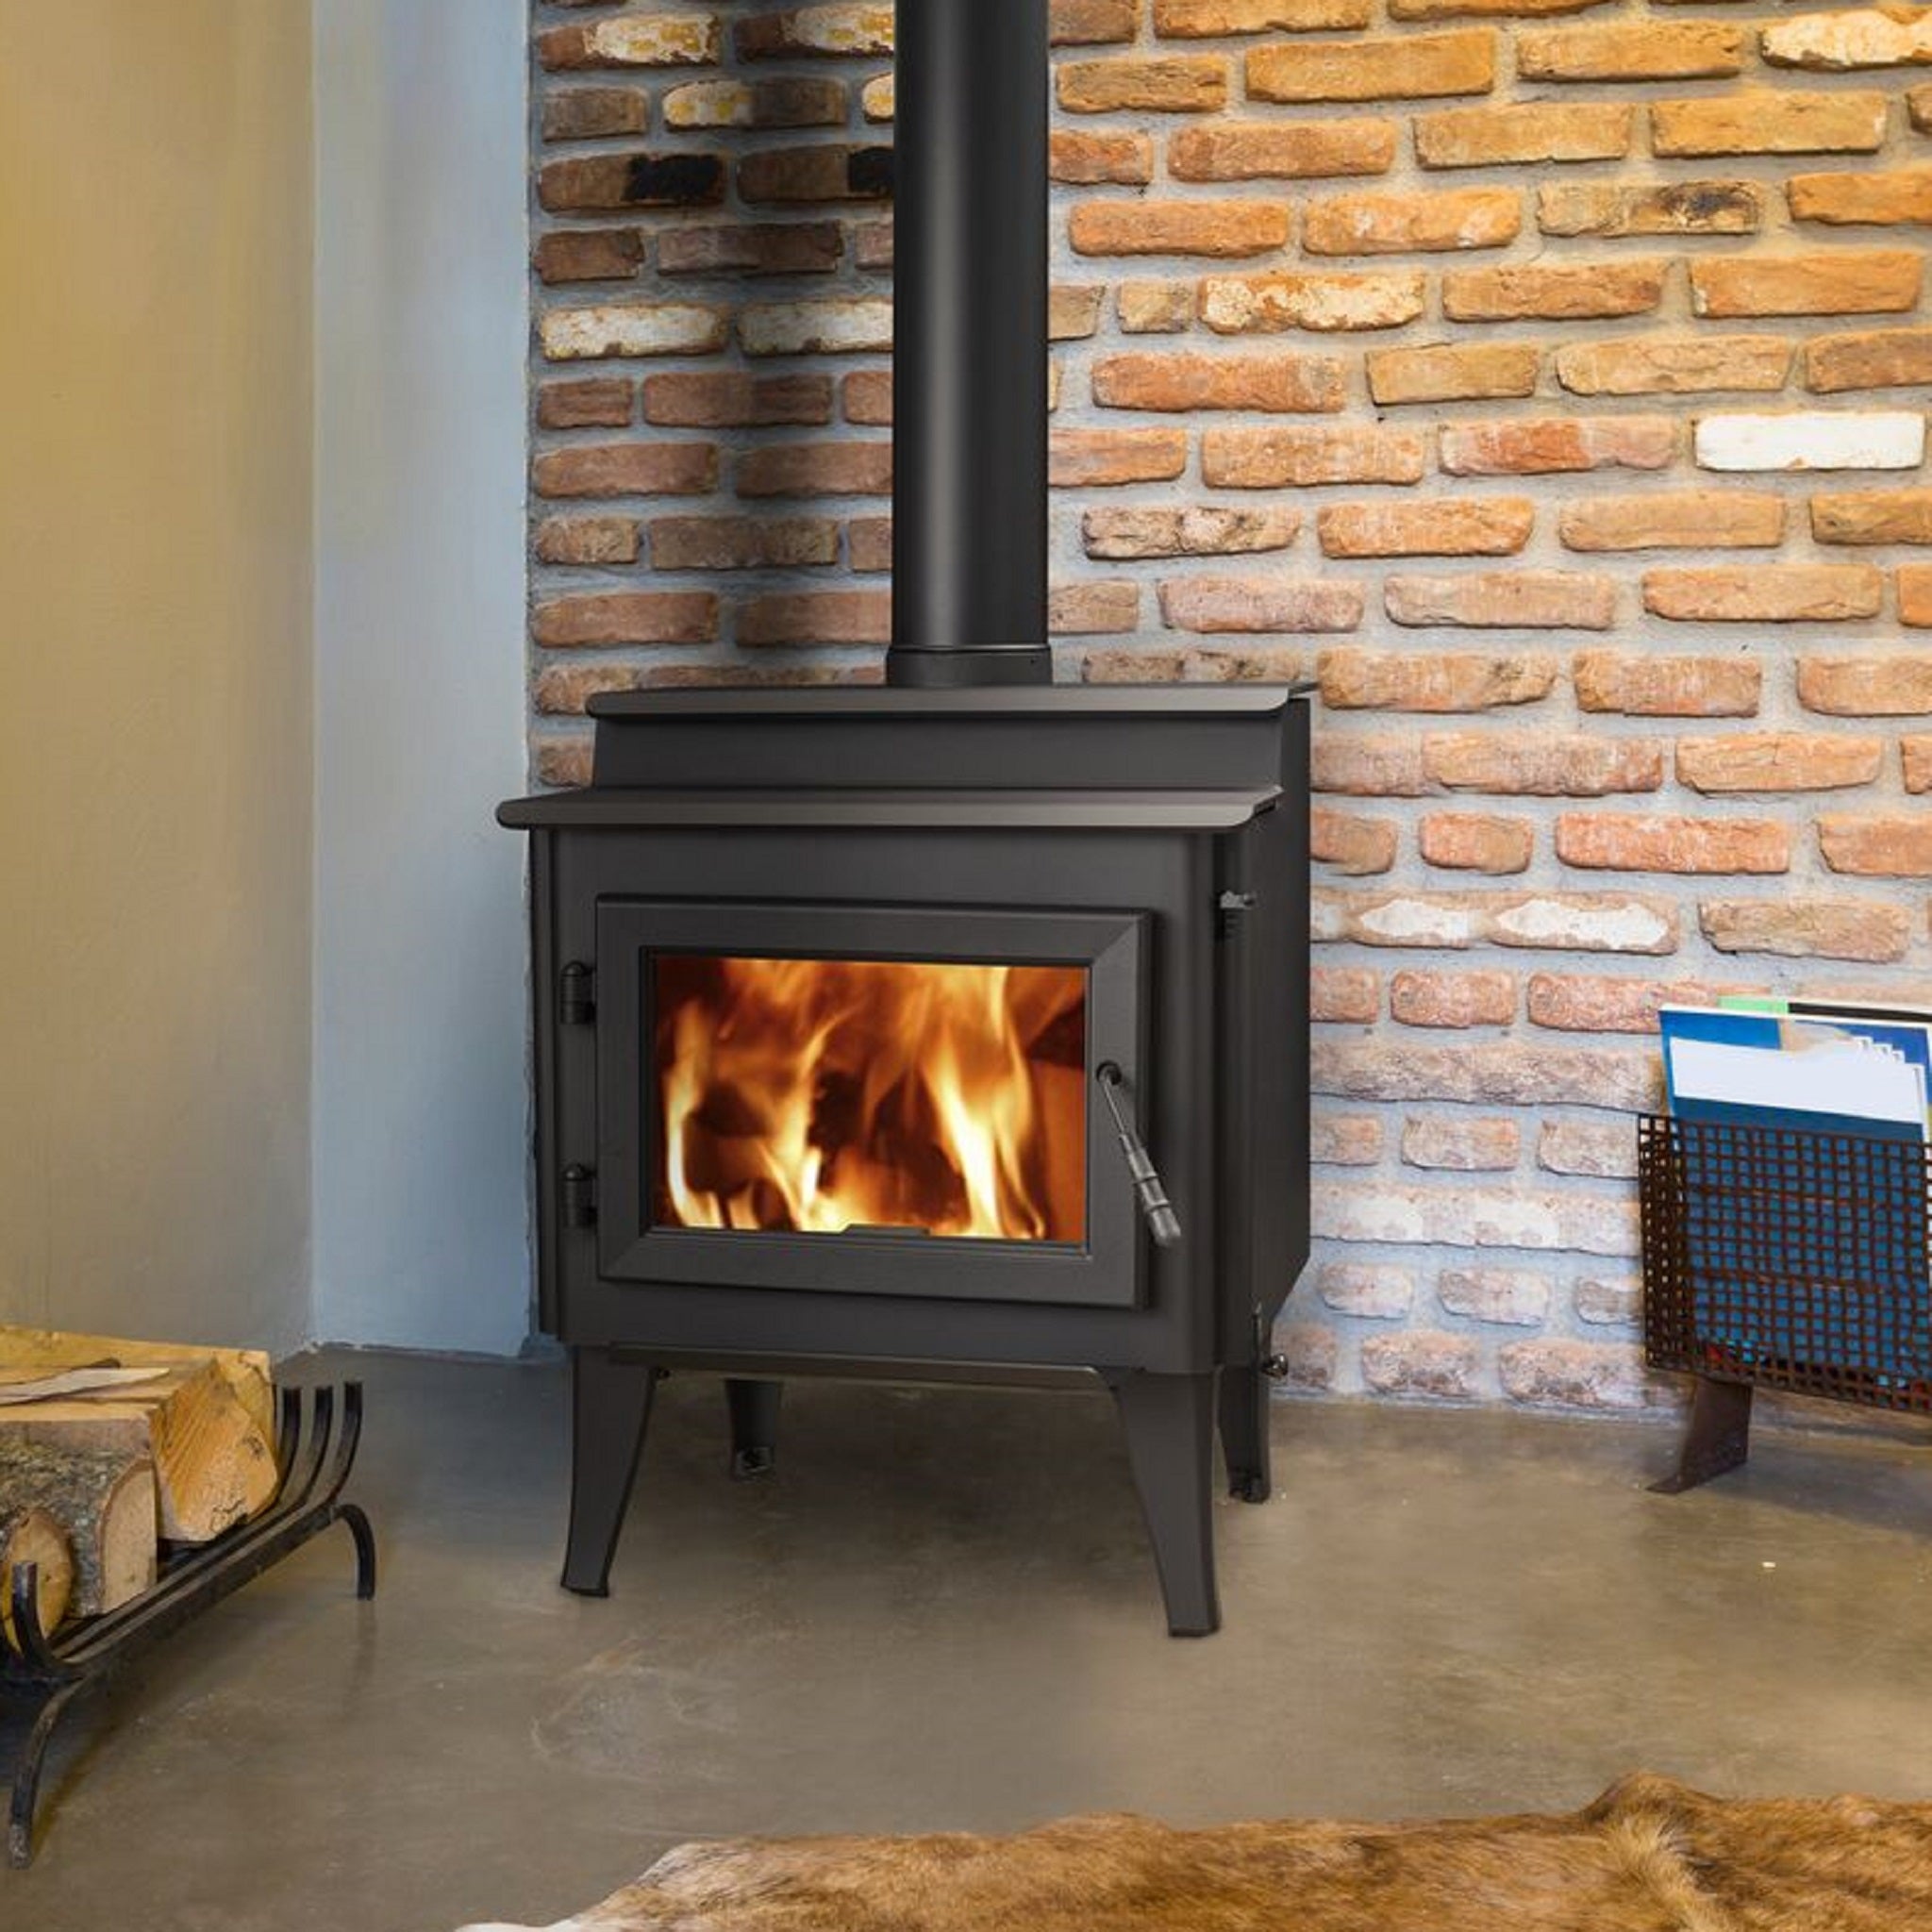 Wood Stoves, Cookstoves, Ranges, Fireplaces & Parts